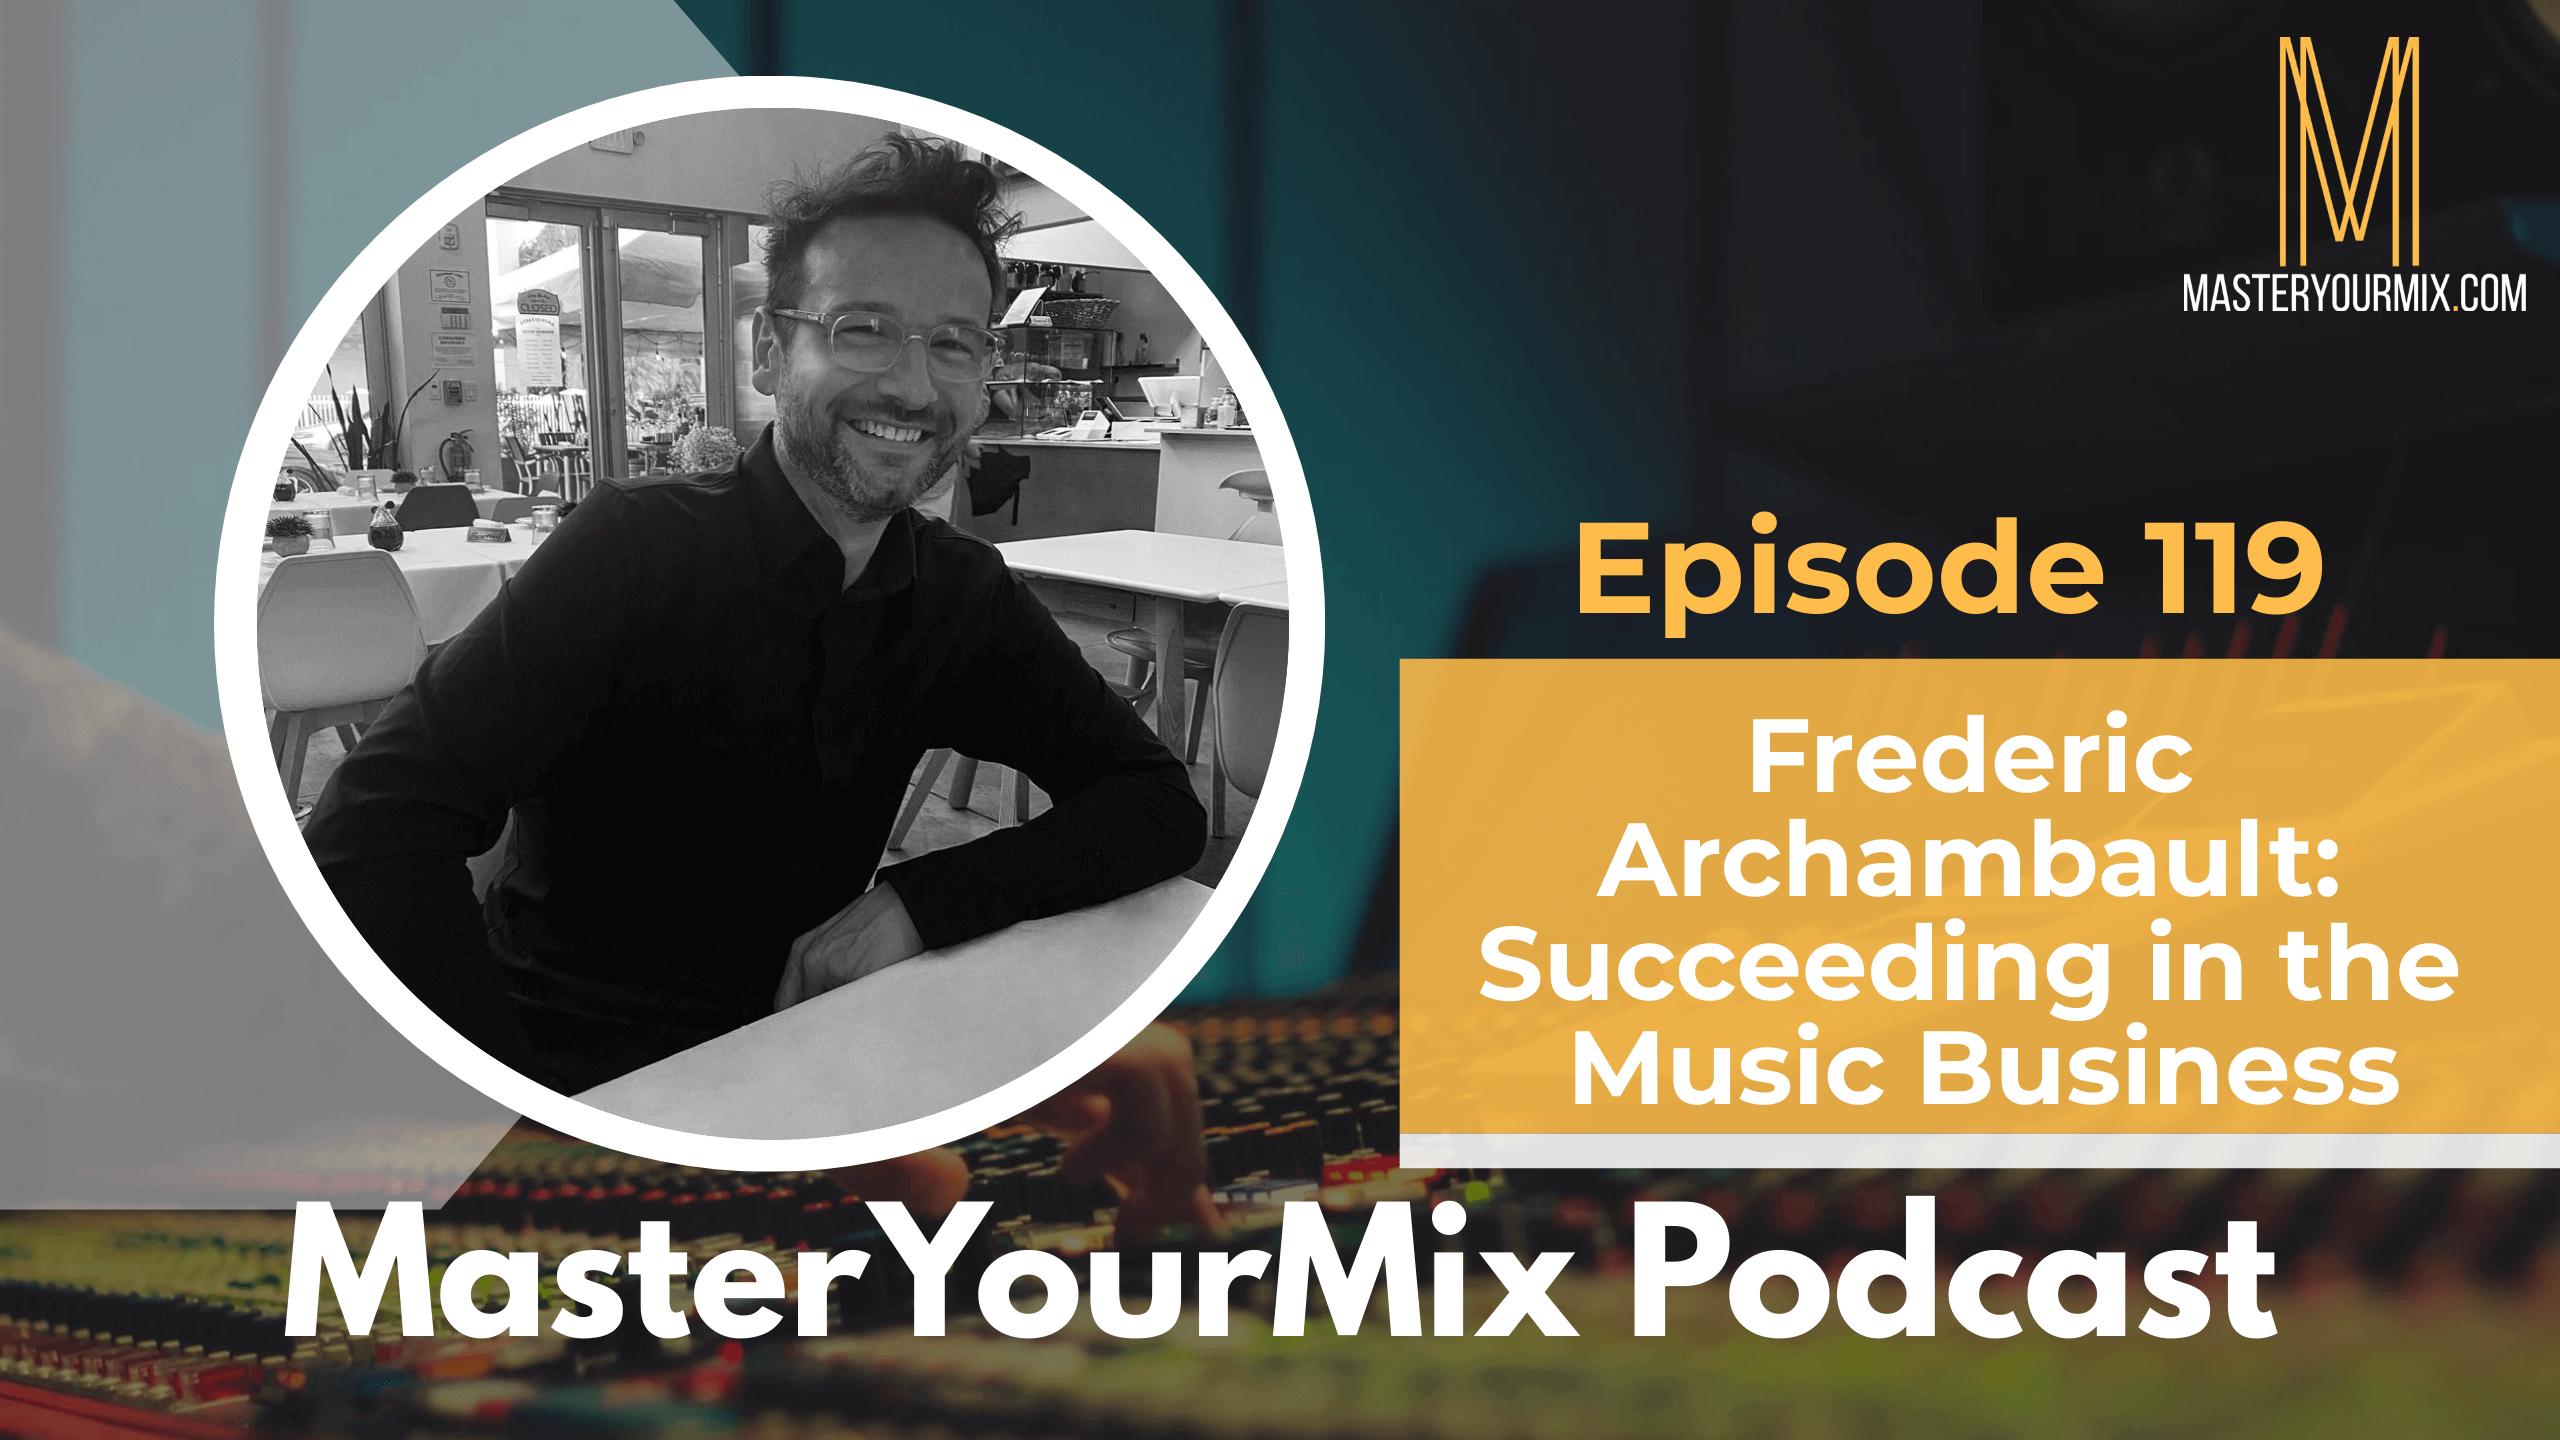 master your mix podcast, ep 119 frederic archambault